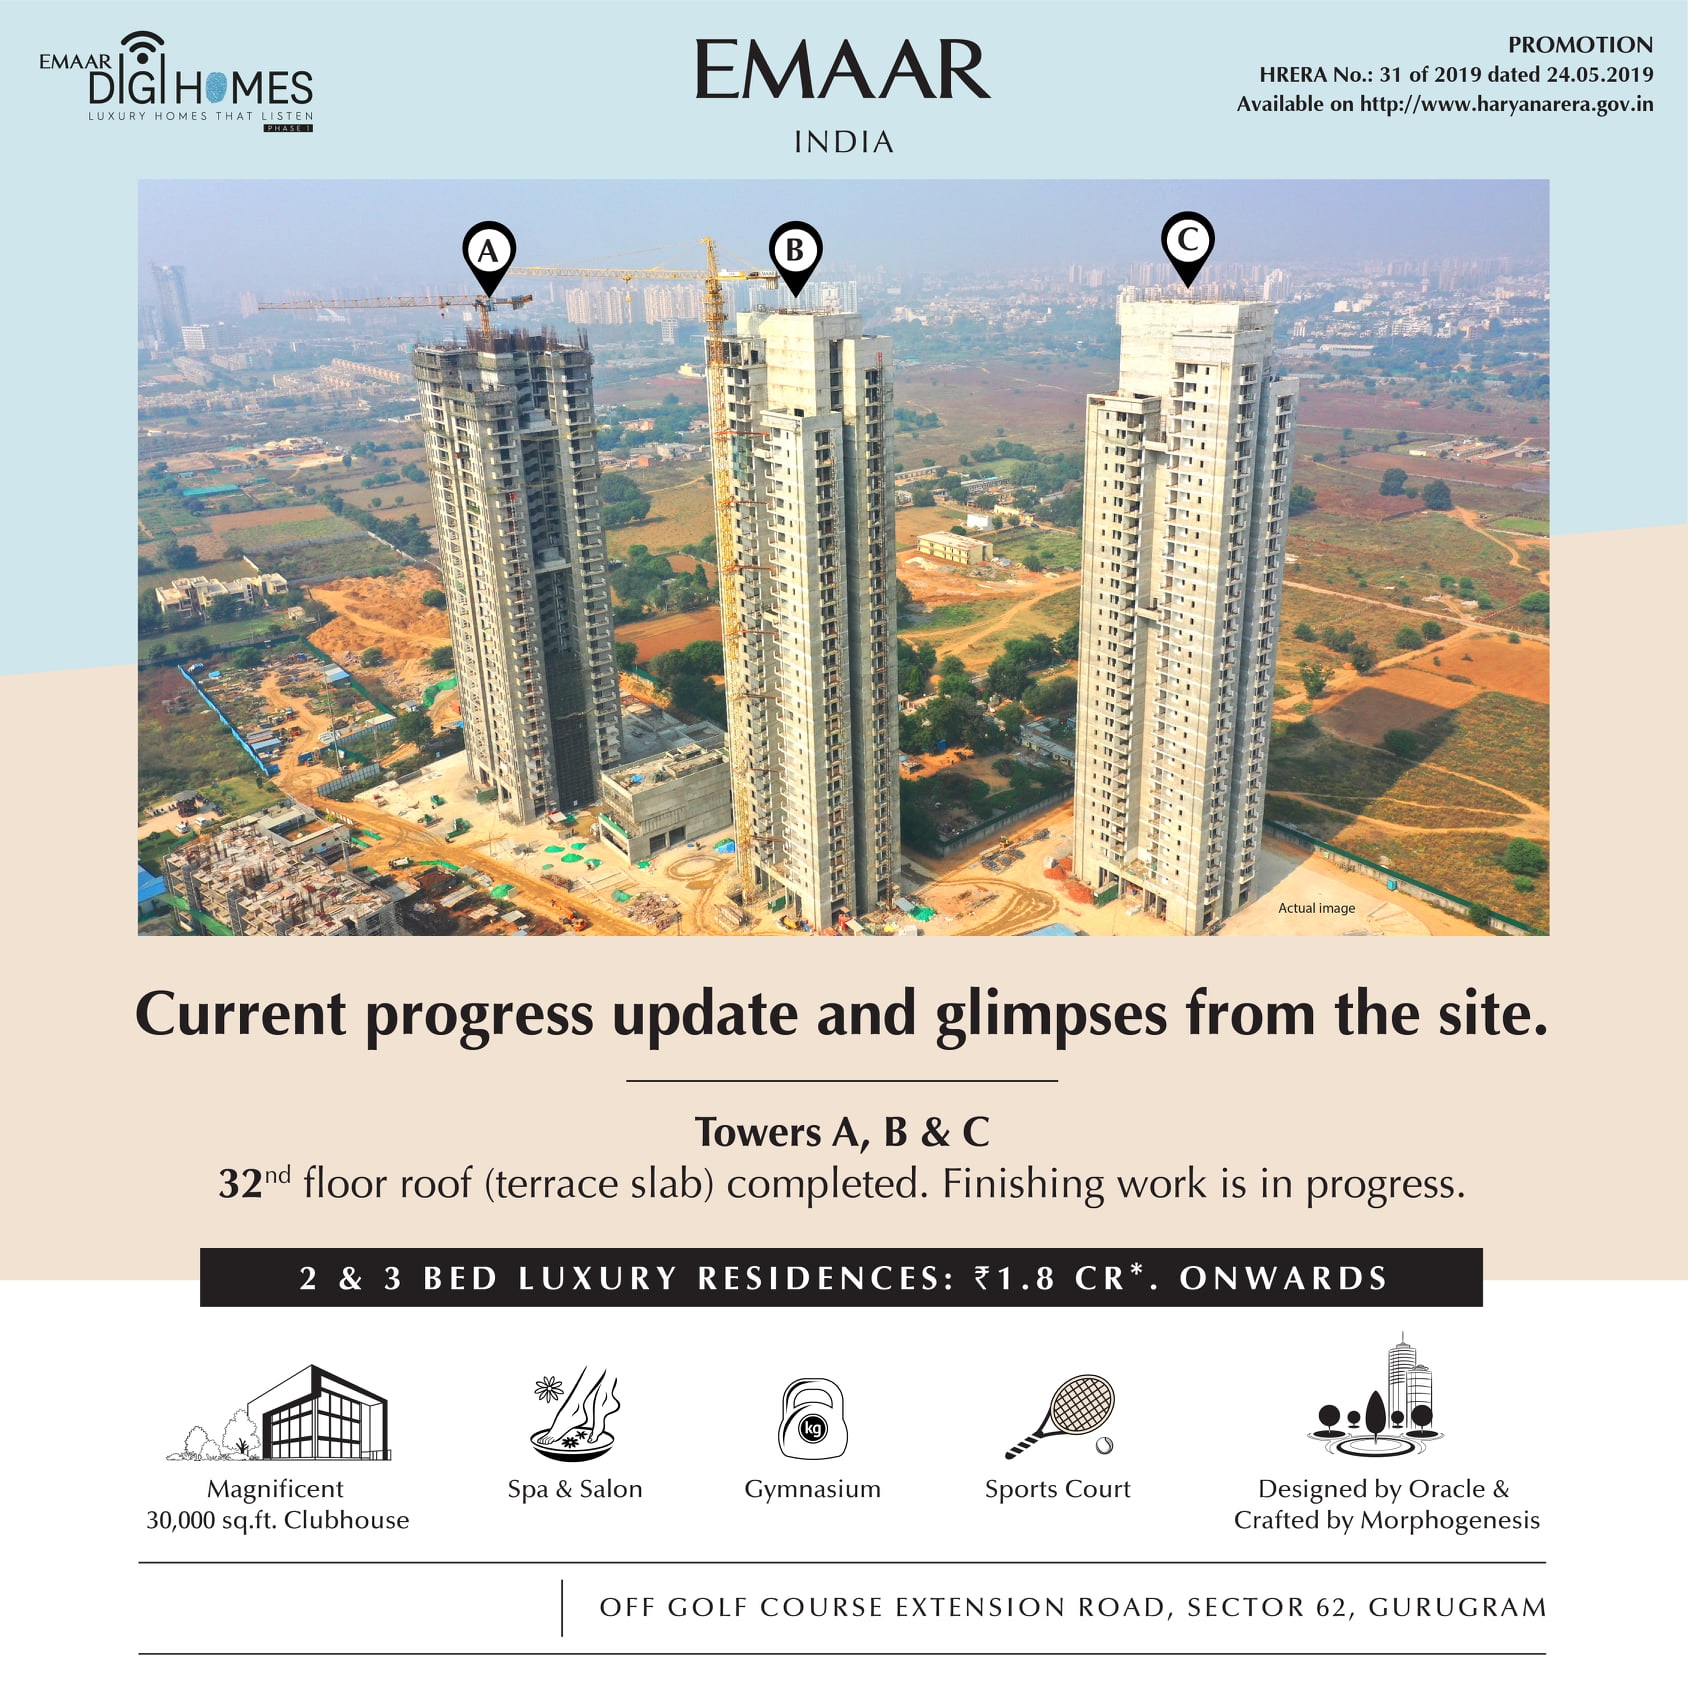 Current progress update and glimpses from the site at Emaar Digi Homes in Gurgaon